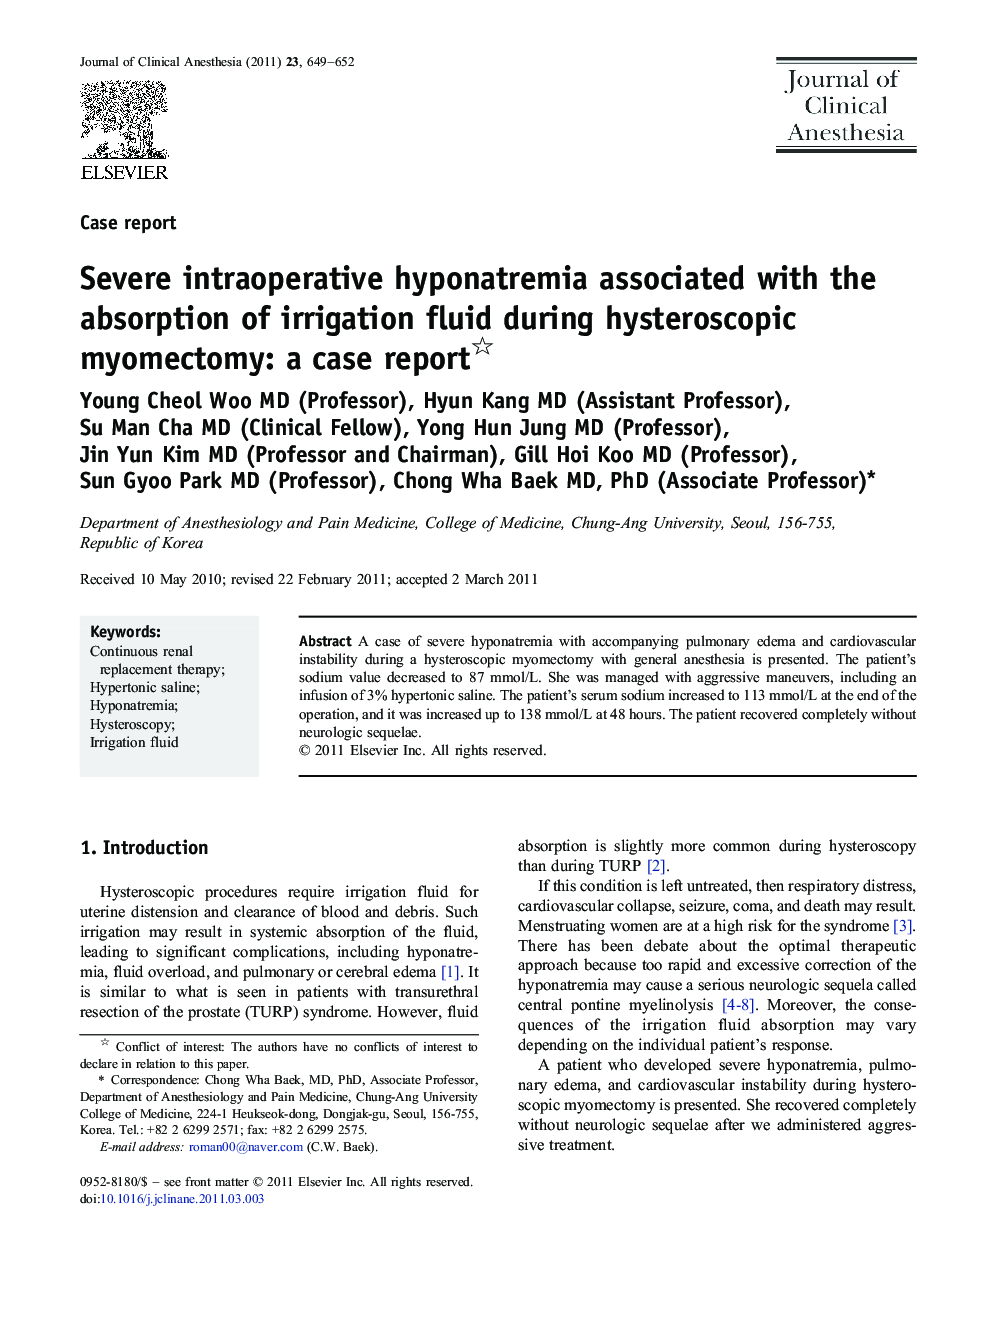 Severe intraoperative hyponatremia associated with the absorption of irrigation fluid during hysteroscopic myomectomy: a case report 